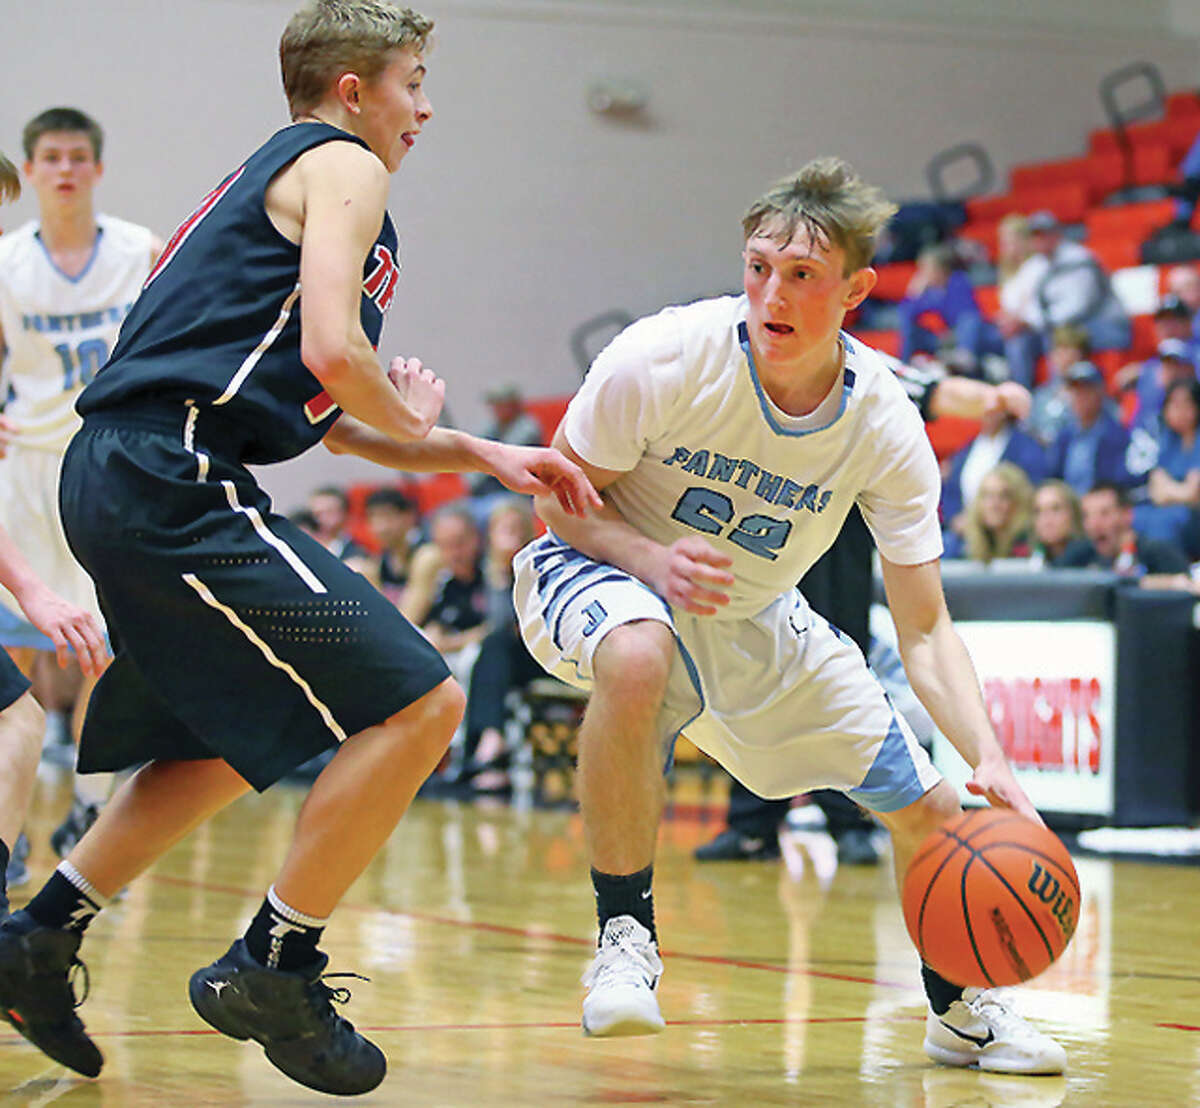 Jersey’s Zac Ridenhour, right, drives the lane against Triad’s Brendan Grigg in Monday night’s Class 3A Regional quarterfinal game at Triad High School. Jersey won the game 65-41.